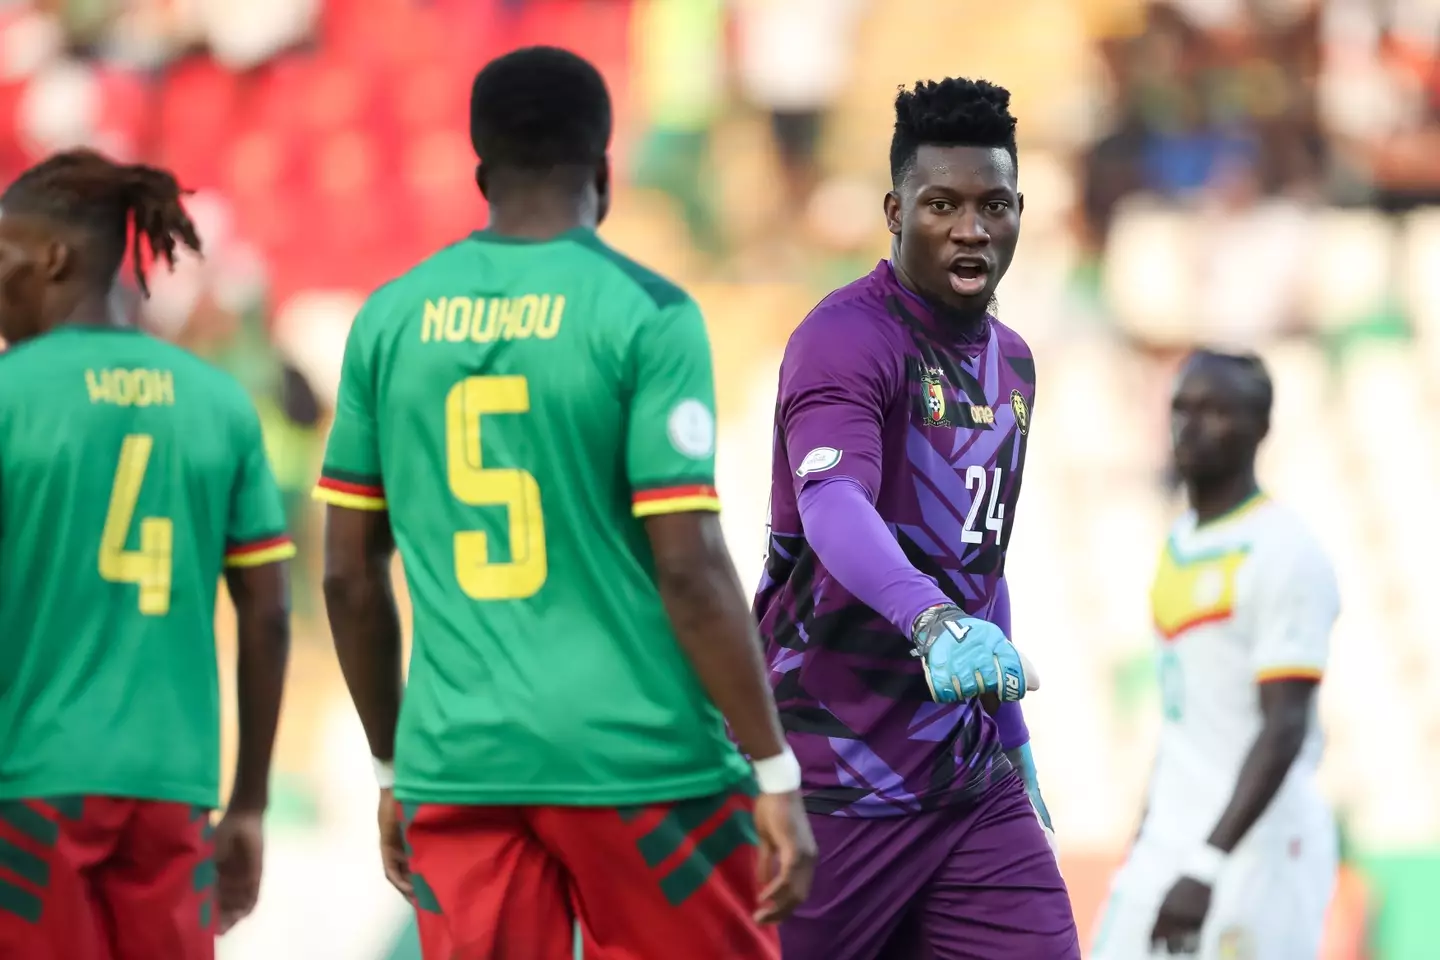 Onana during the game against Senegal. (Image